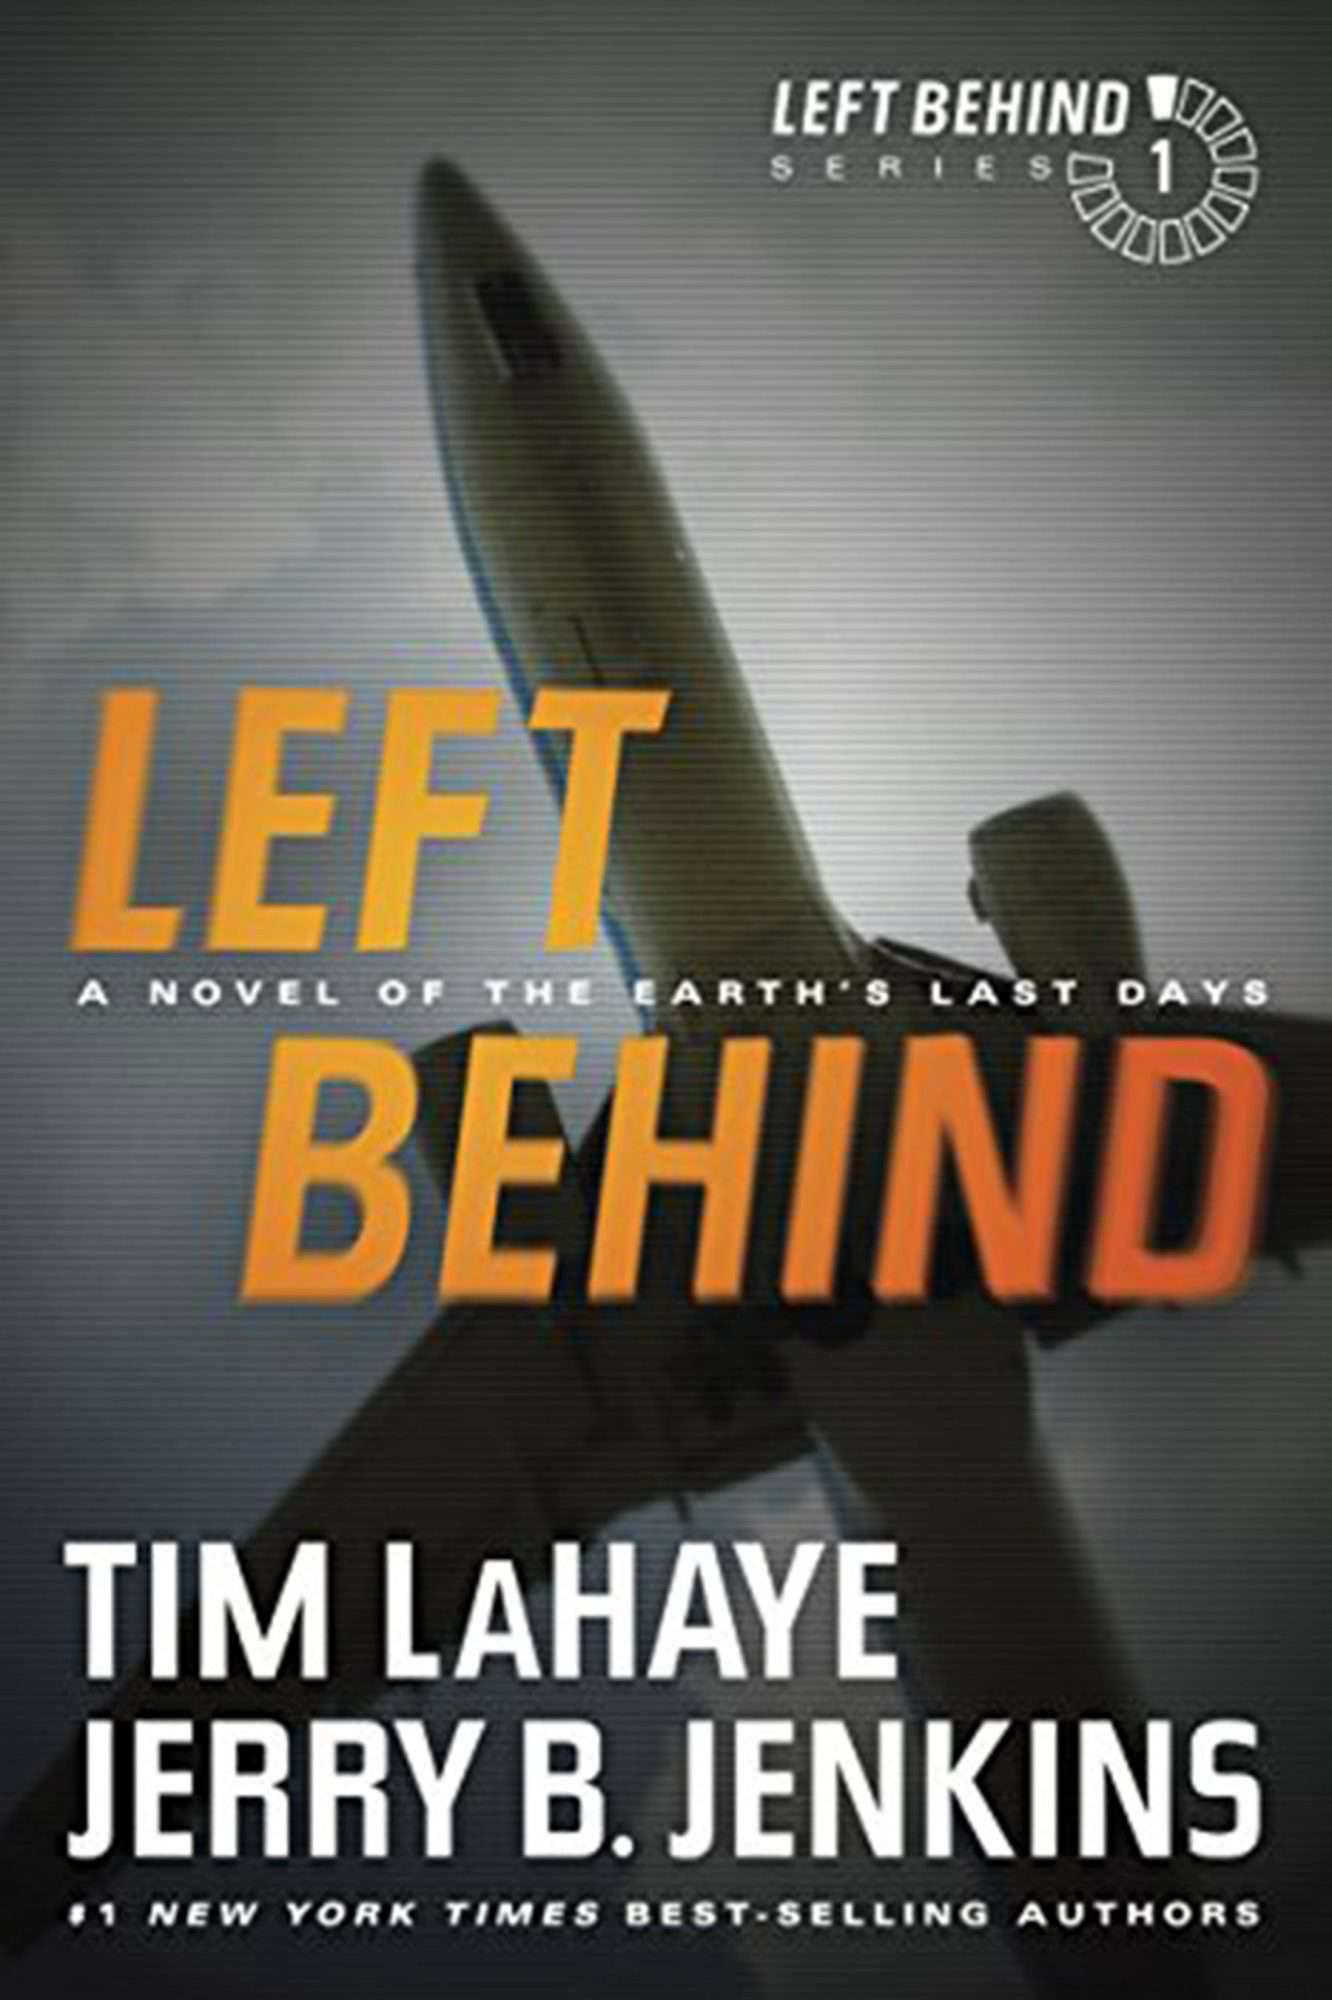 Left Behind&nbsp;by Tim LaHaye and Jerry B. Jenkins